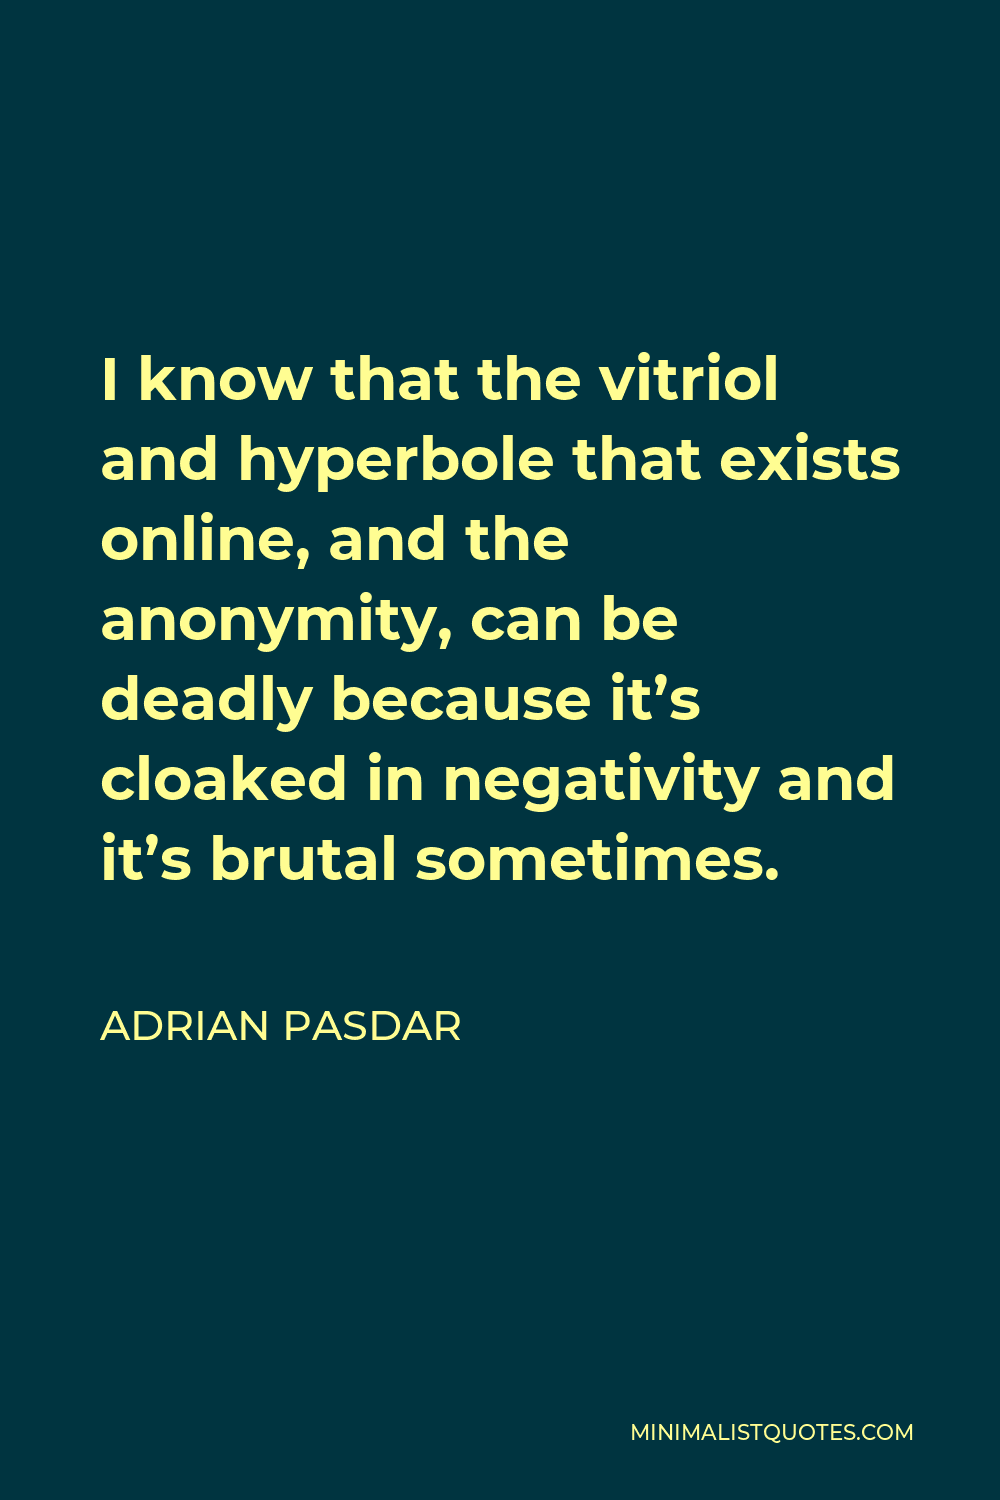 Adrian Pasdar Quote - I know that the vitriol and hyperbole that exists online, and the anonymity, can be deadly because it’s cloaked in negativity and it’s brutal sometimes.